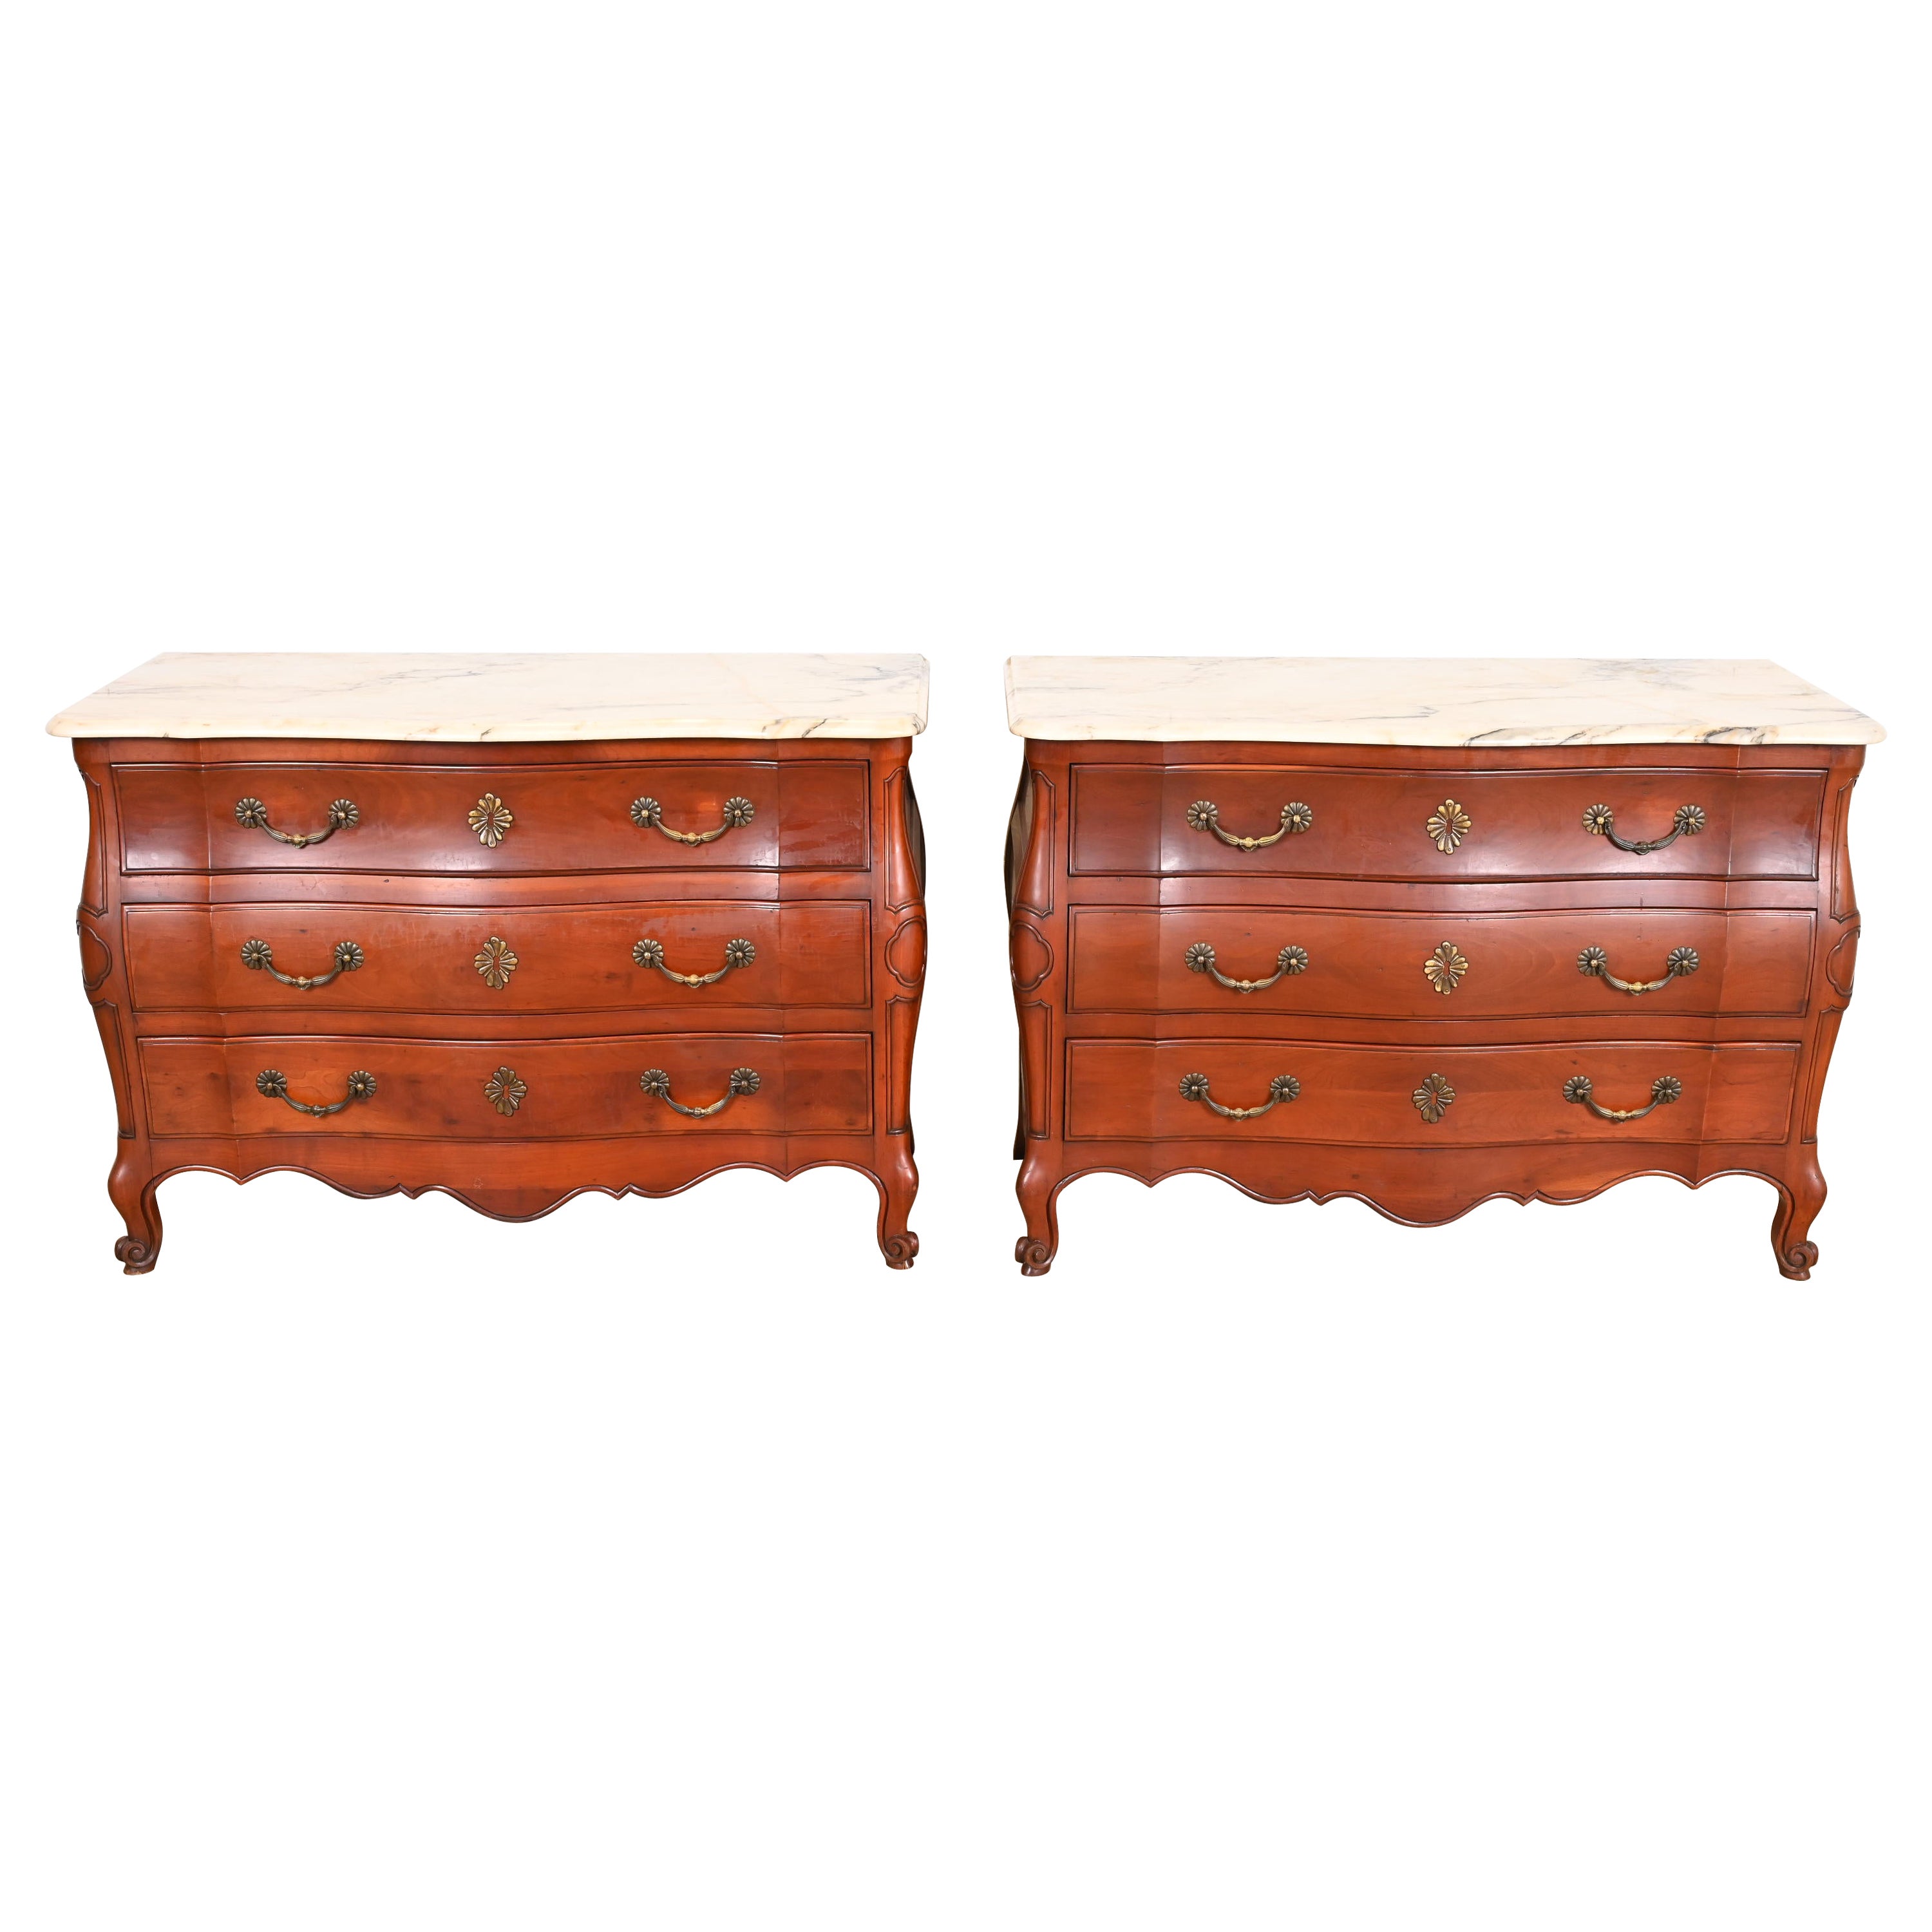 John Widdicomb French Provincial Louis XV Cherry Marble Top Chests of Drawers For Sale